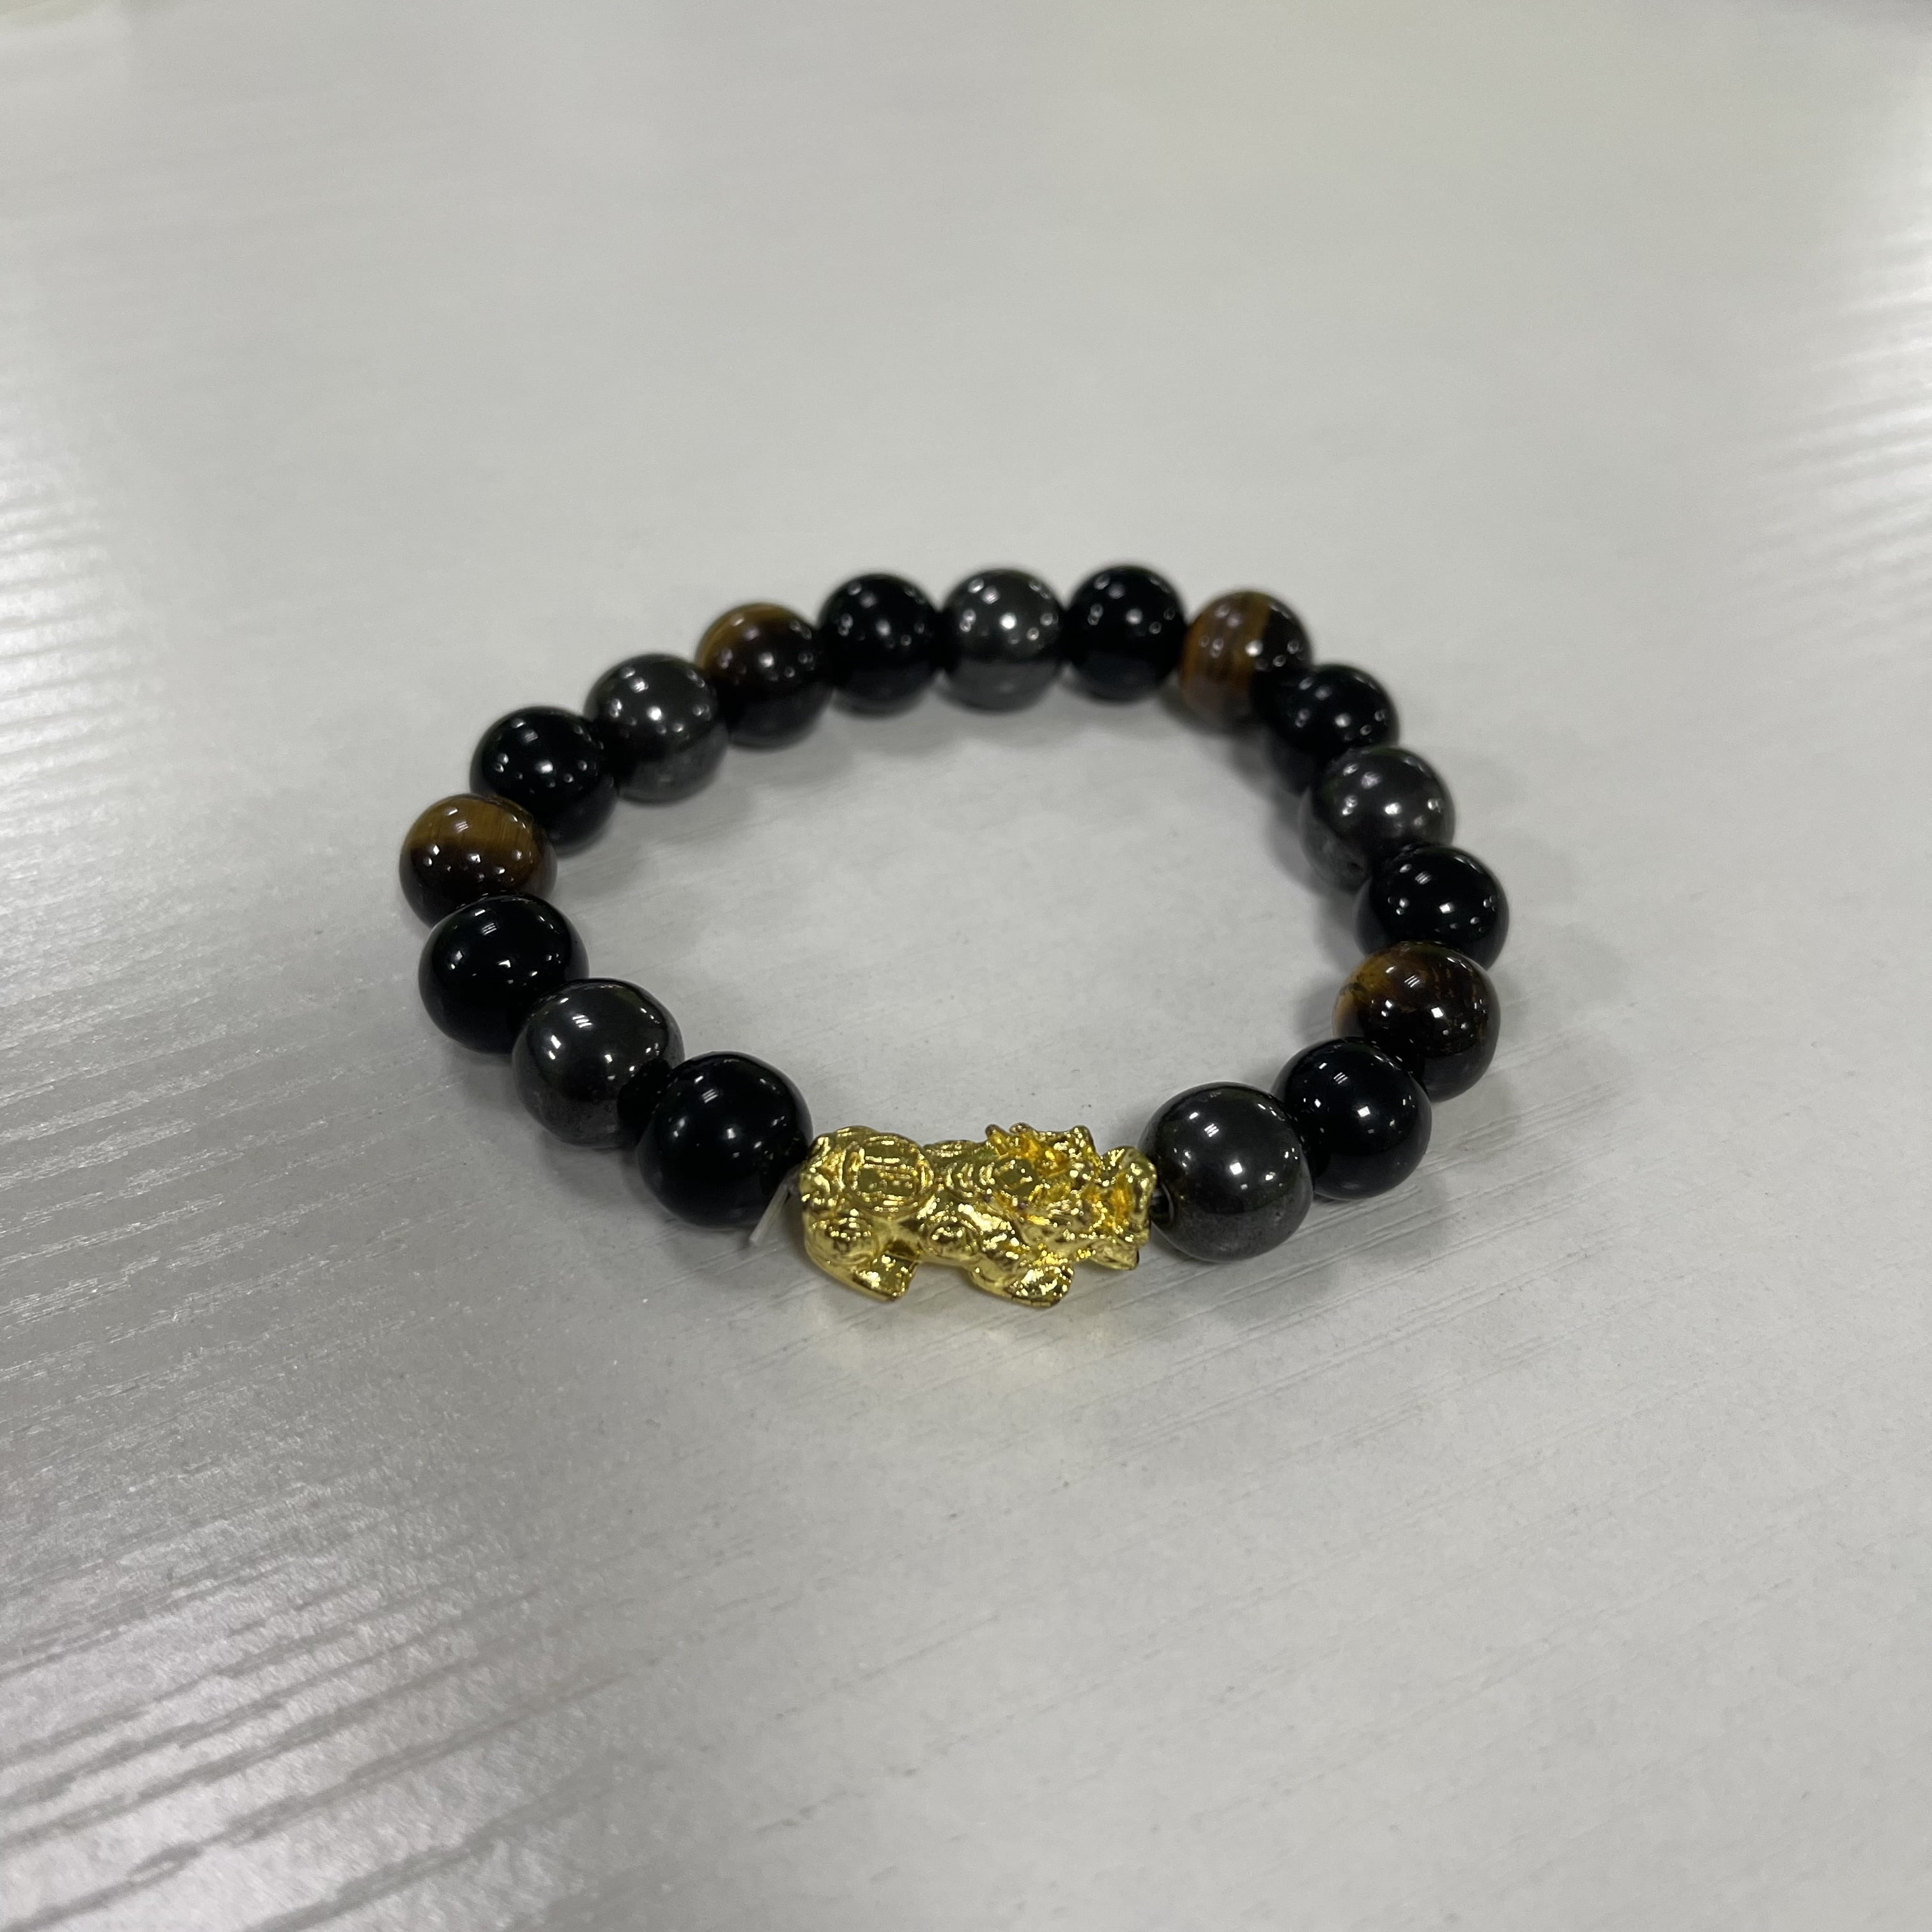 gold dragon and feng shui pearl in black agate Green tiger eye bracelet gold dragon jewel green tiger eye jewel feng shui jewel